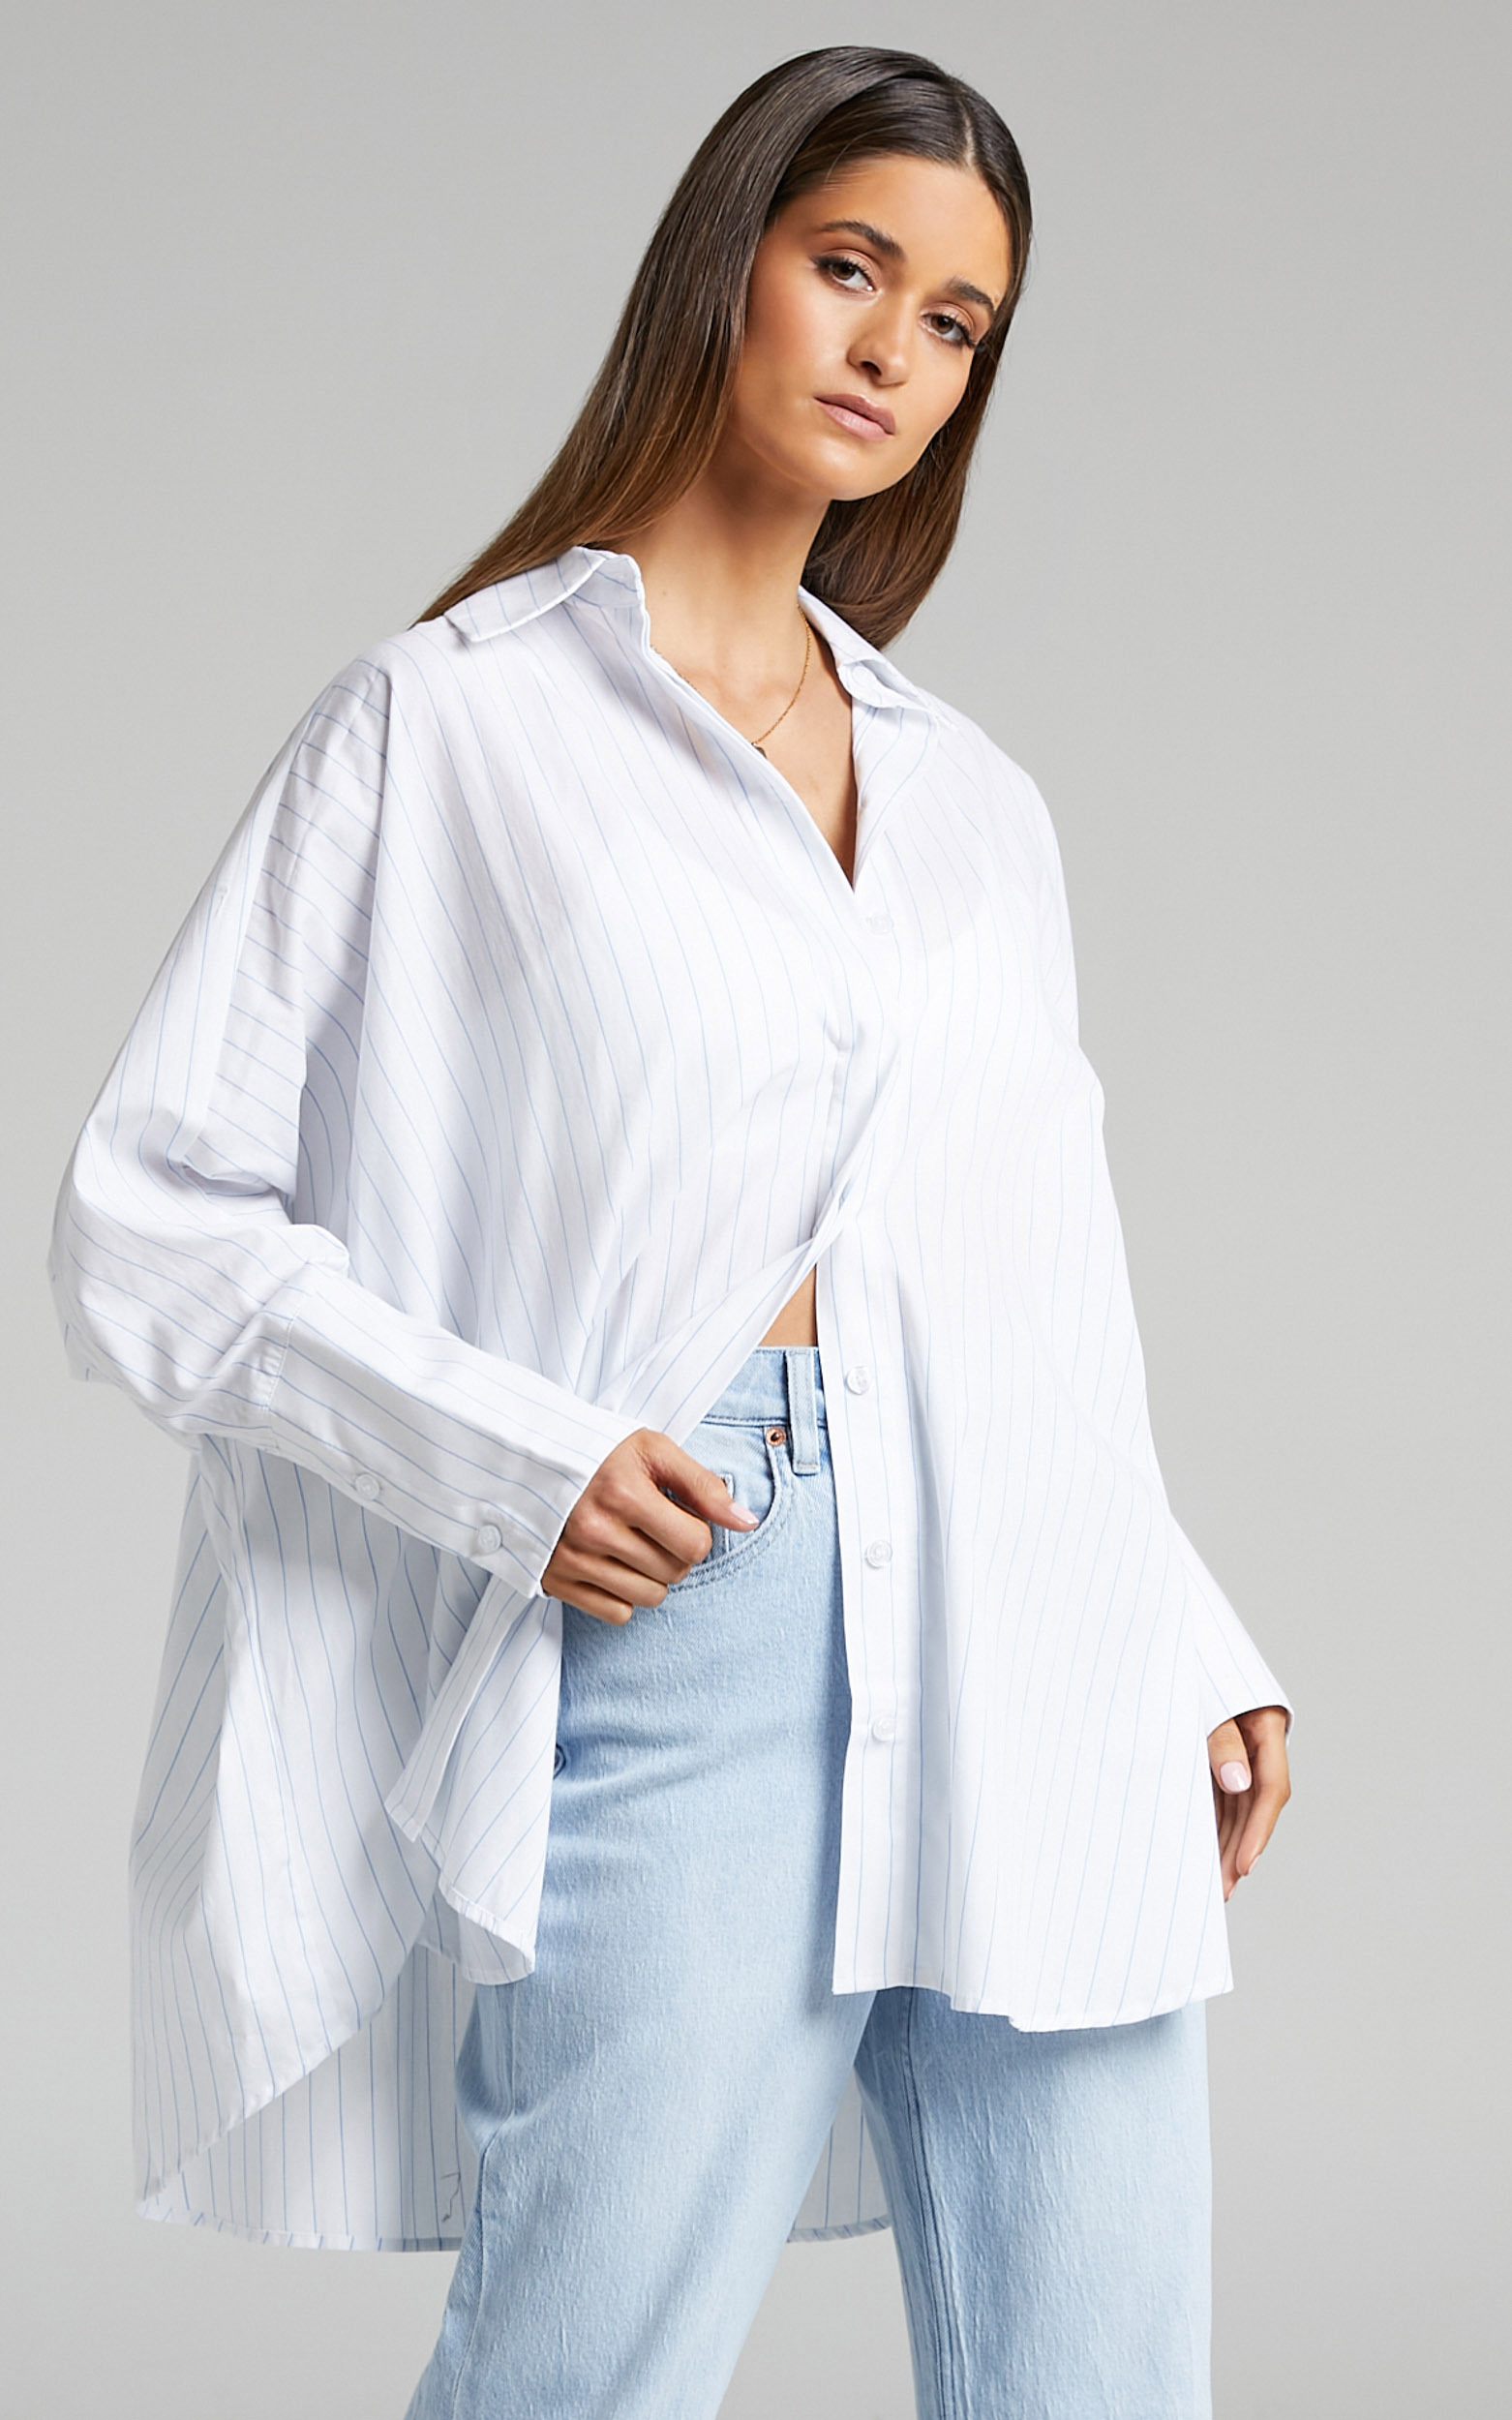 Eily Pinstripe Oversized Button Up Shirt in White & Blue - 06, WHT1, hi-res image number null